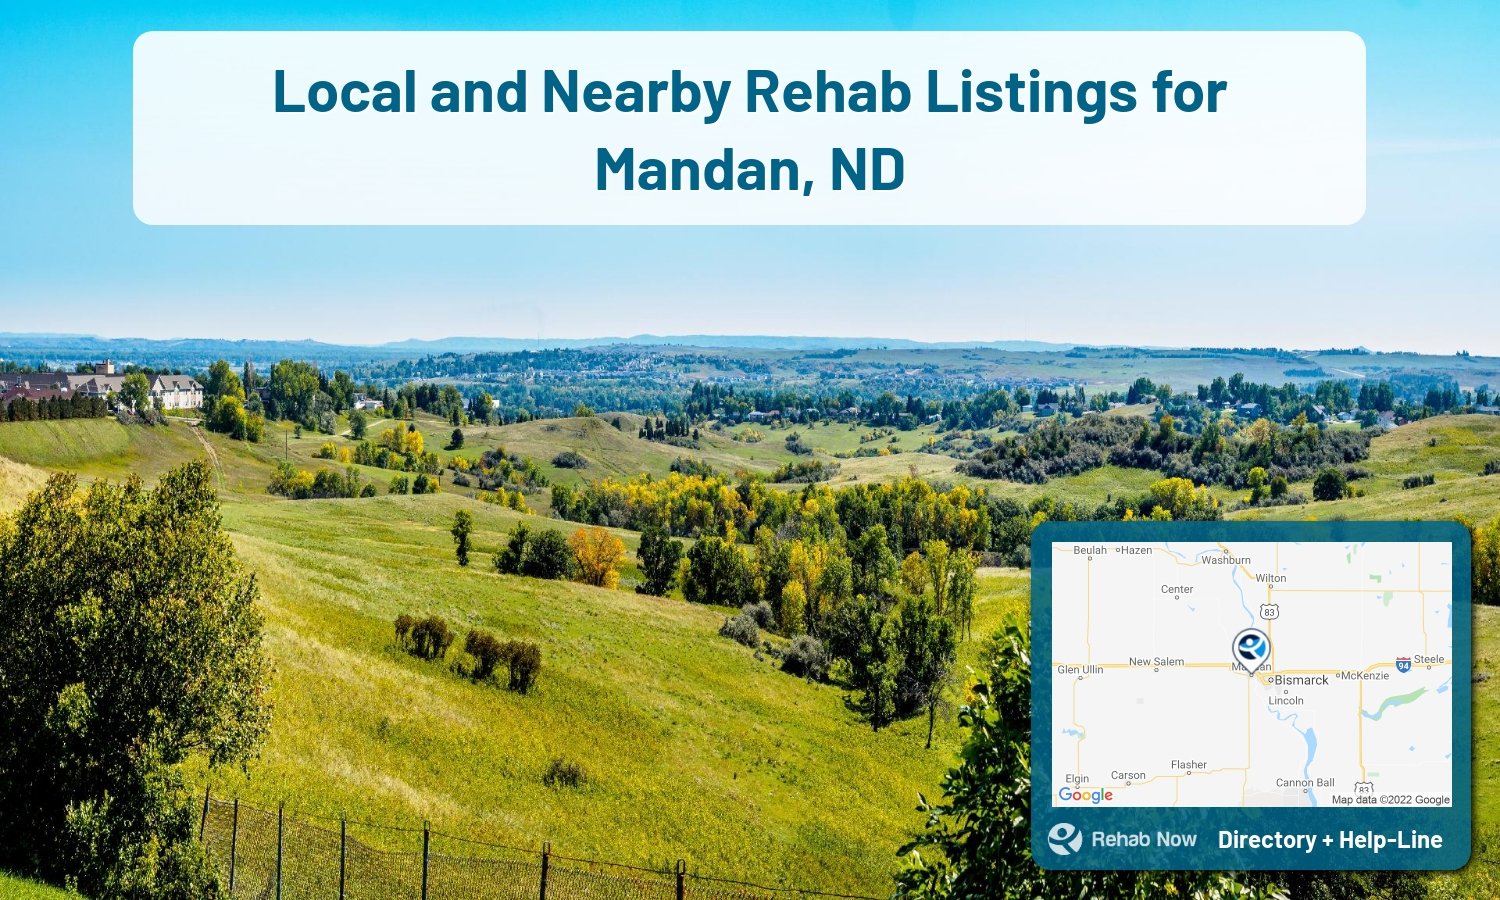 View options, availability, treatment methods, and more, for drug rehab and alcohol treatment in Mandan, North Dakota